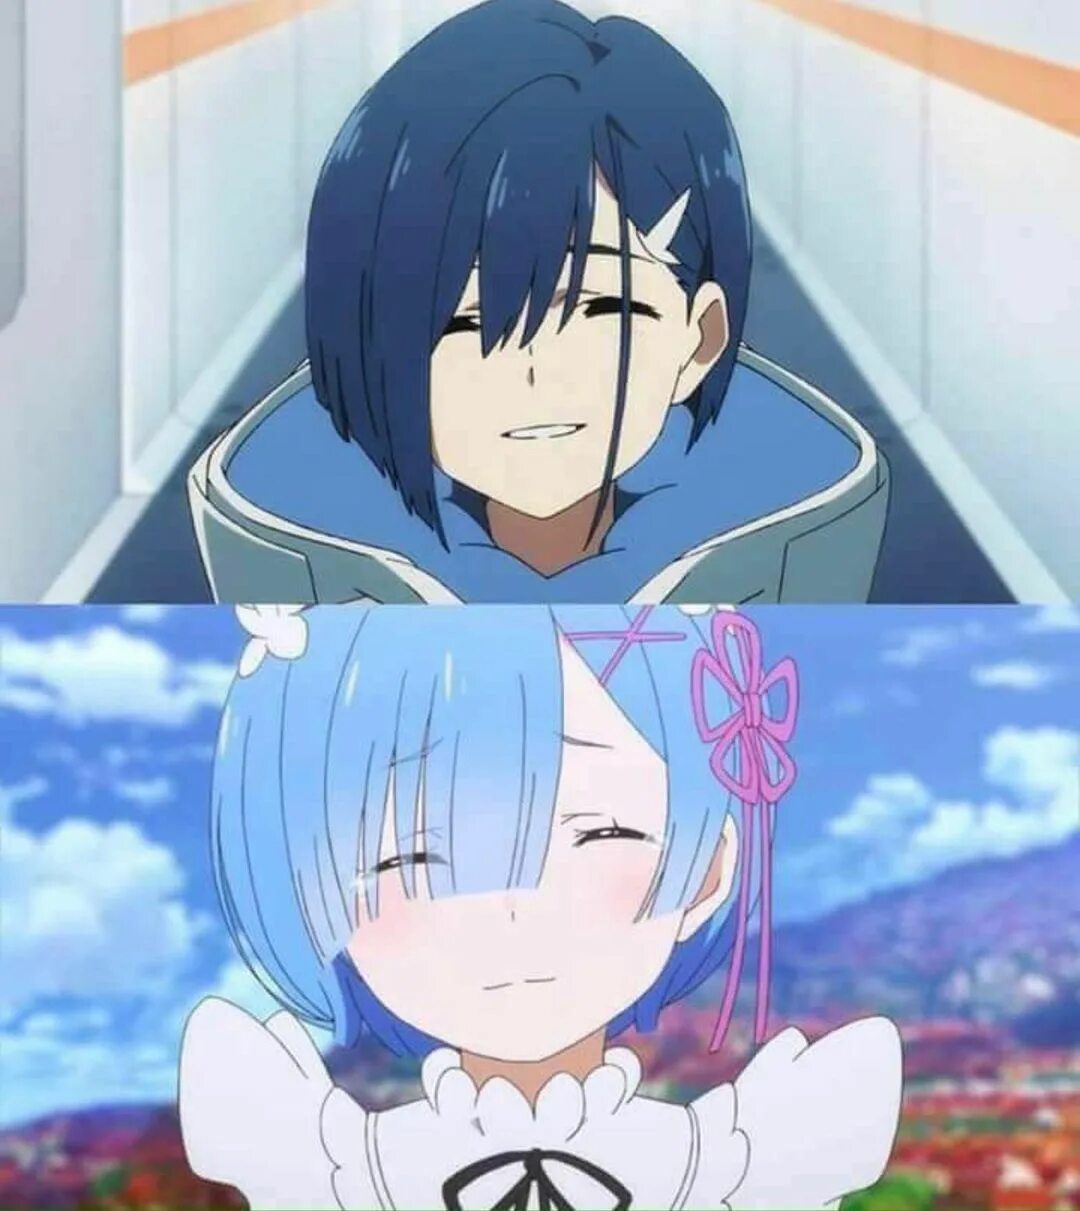 If you want to see more stuff like that Follow @darling_in_the.franxx 🌸 Fo...